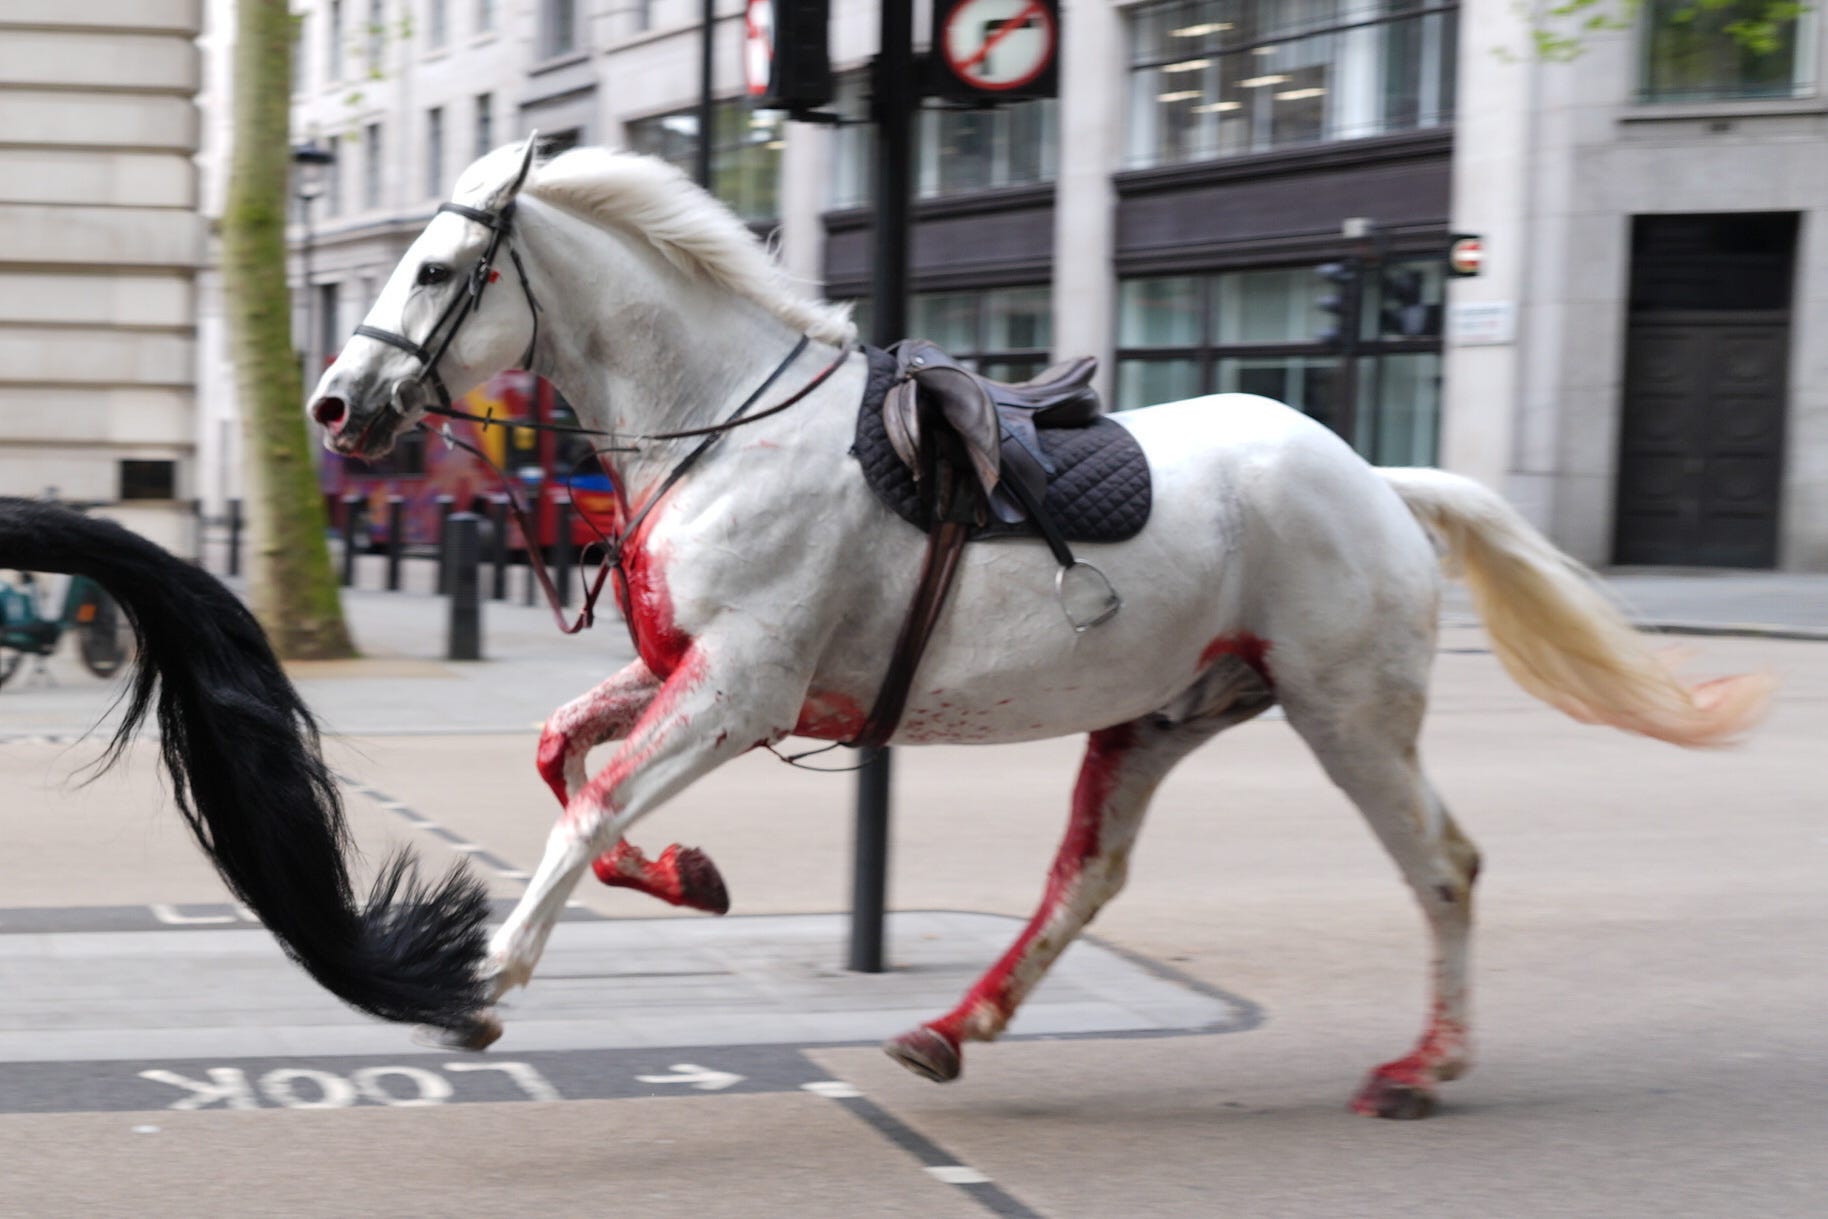 London was brought to a standstill by a herd of rampaging military horses last week